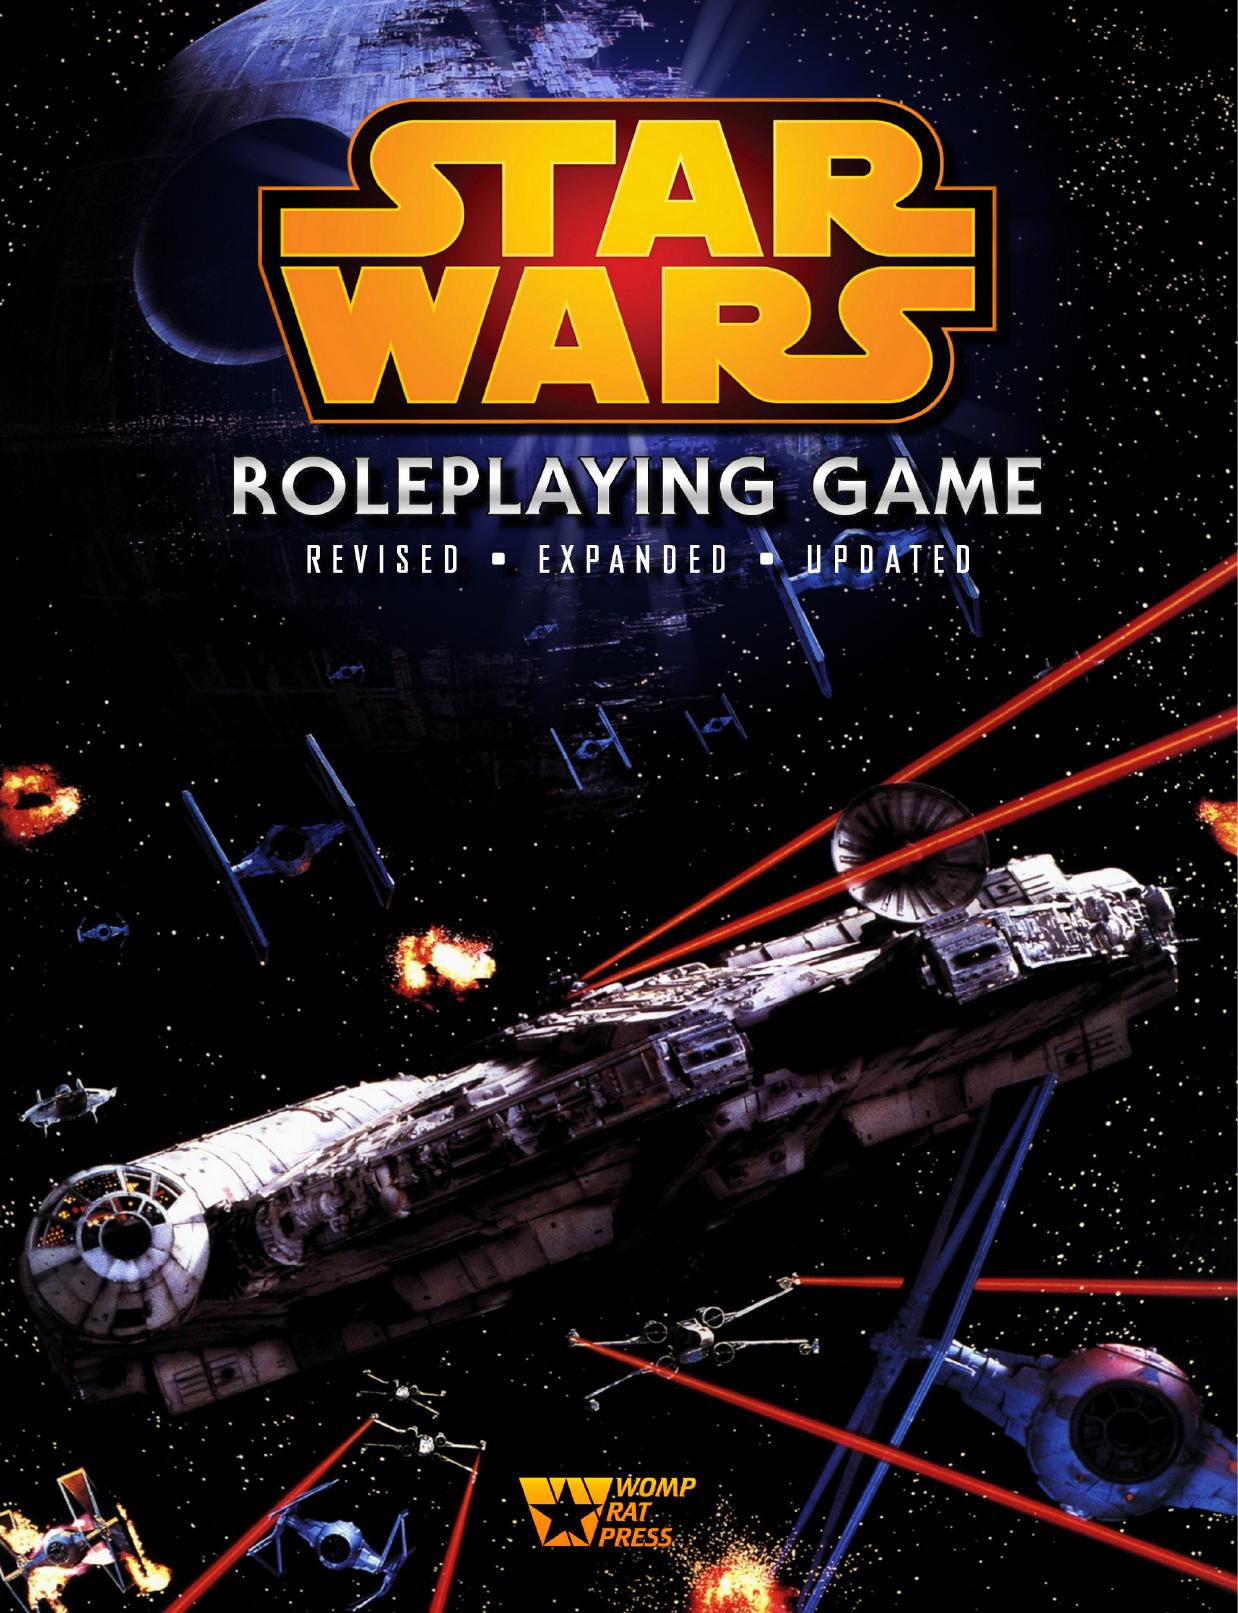 Star Wars Roleplaying Game: Revised, Expanded and Updated